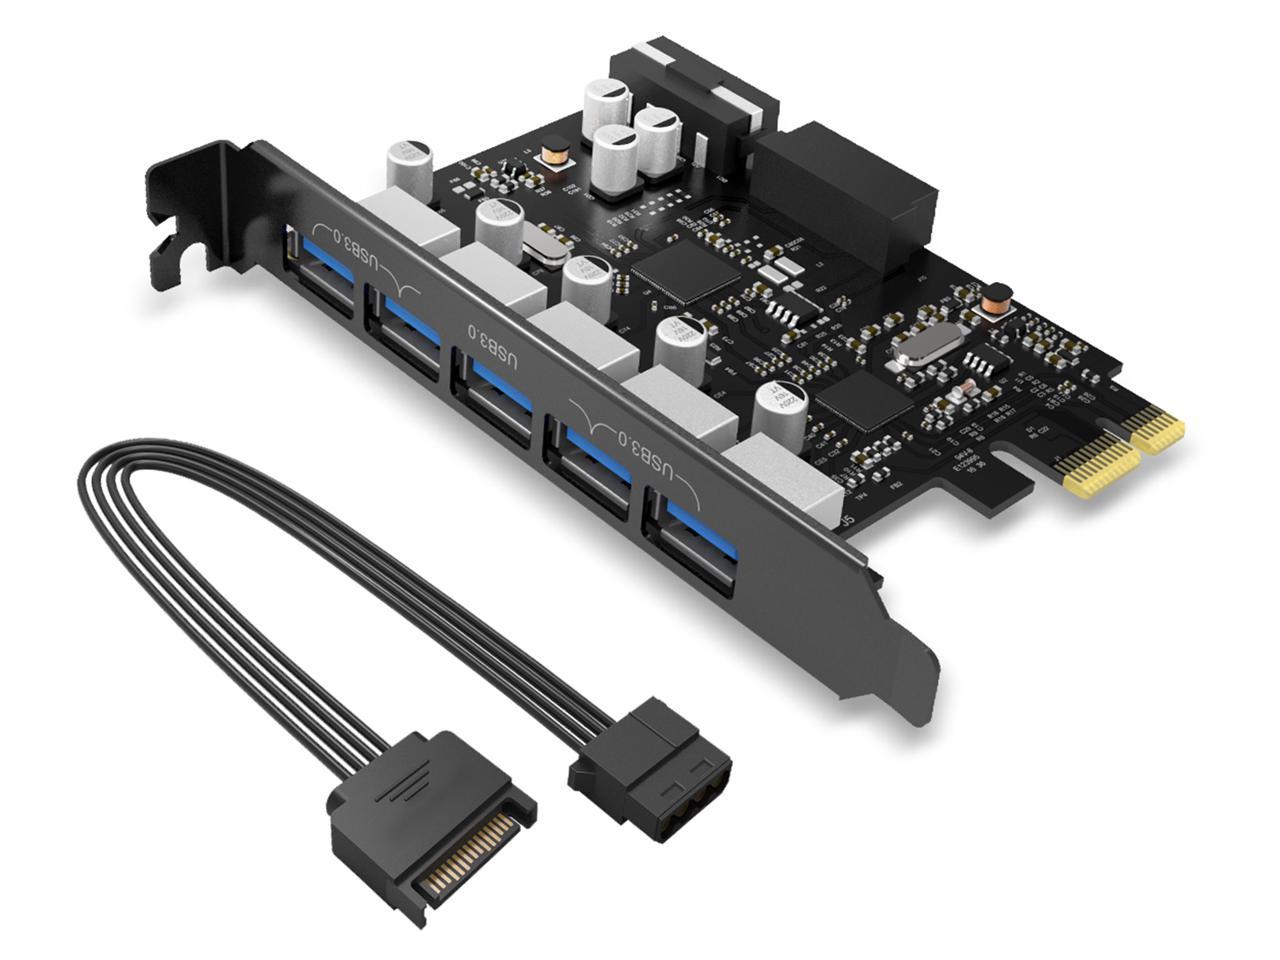 Orico Monster Usb 3 0 Pci Express Card With 5 Rear Usb 3 0 Ports And 1x Internal Usb 3 0 Pin Connector Controller Adapter Card Pvu3 502i Newegg Com